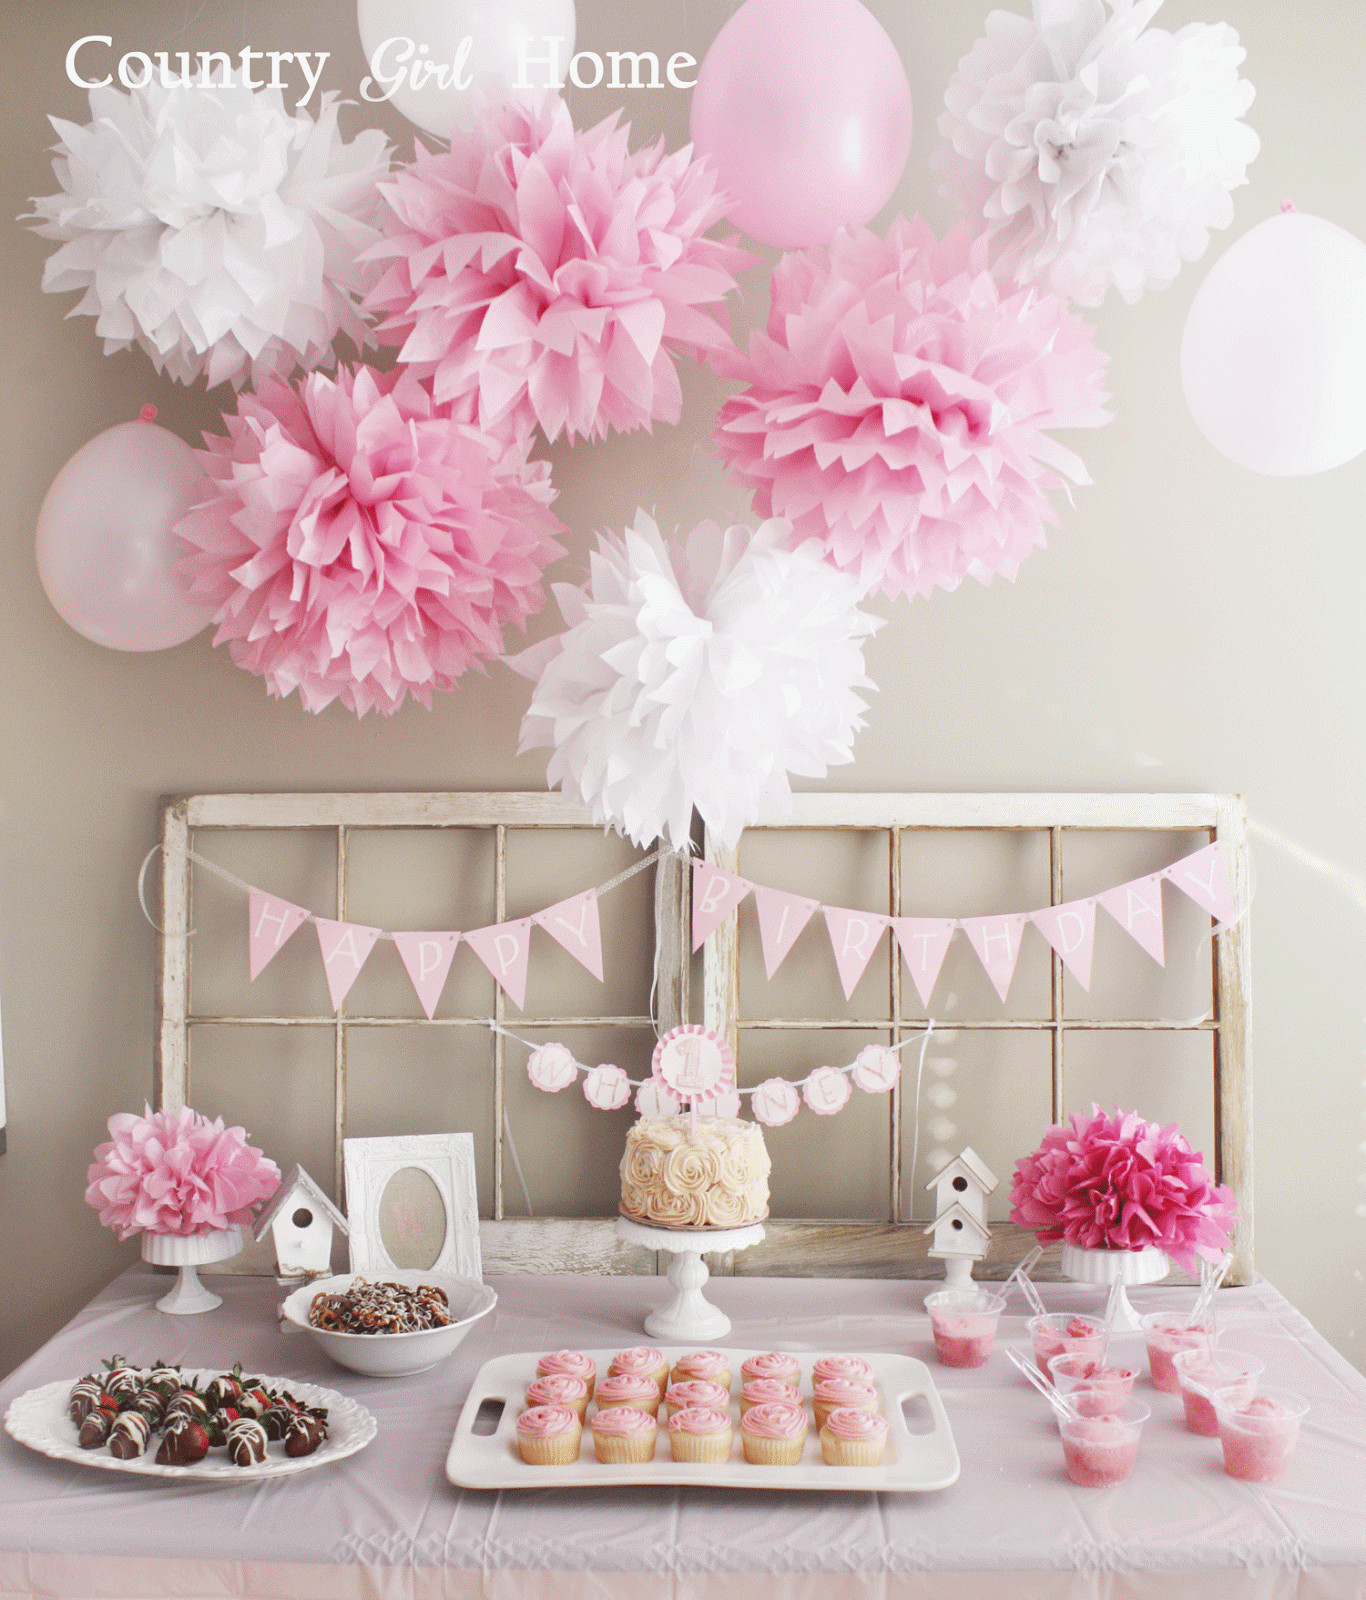 First Birthday Decorations For Girl
 COUNTRY GIRL HOME 1st Birthday